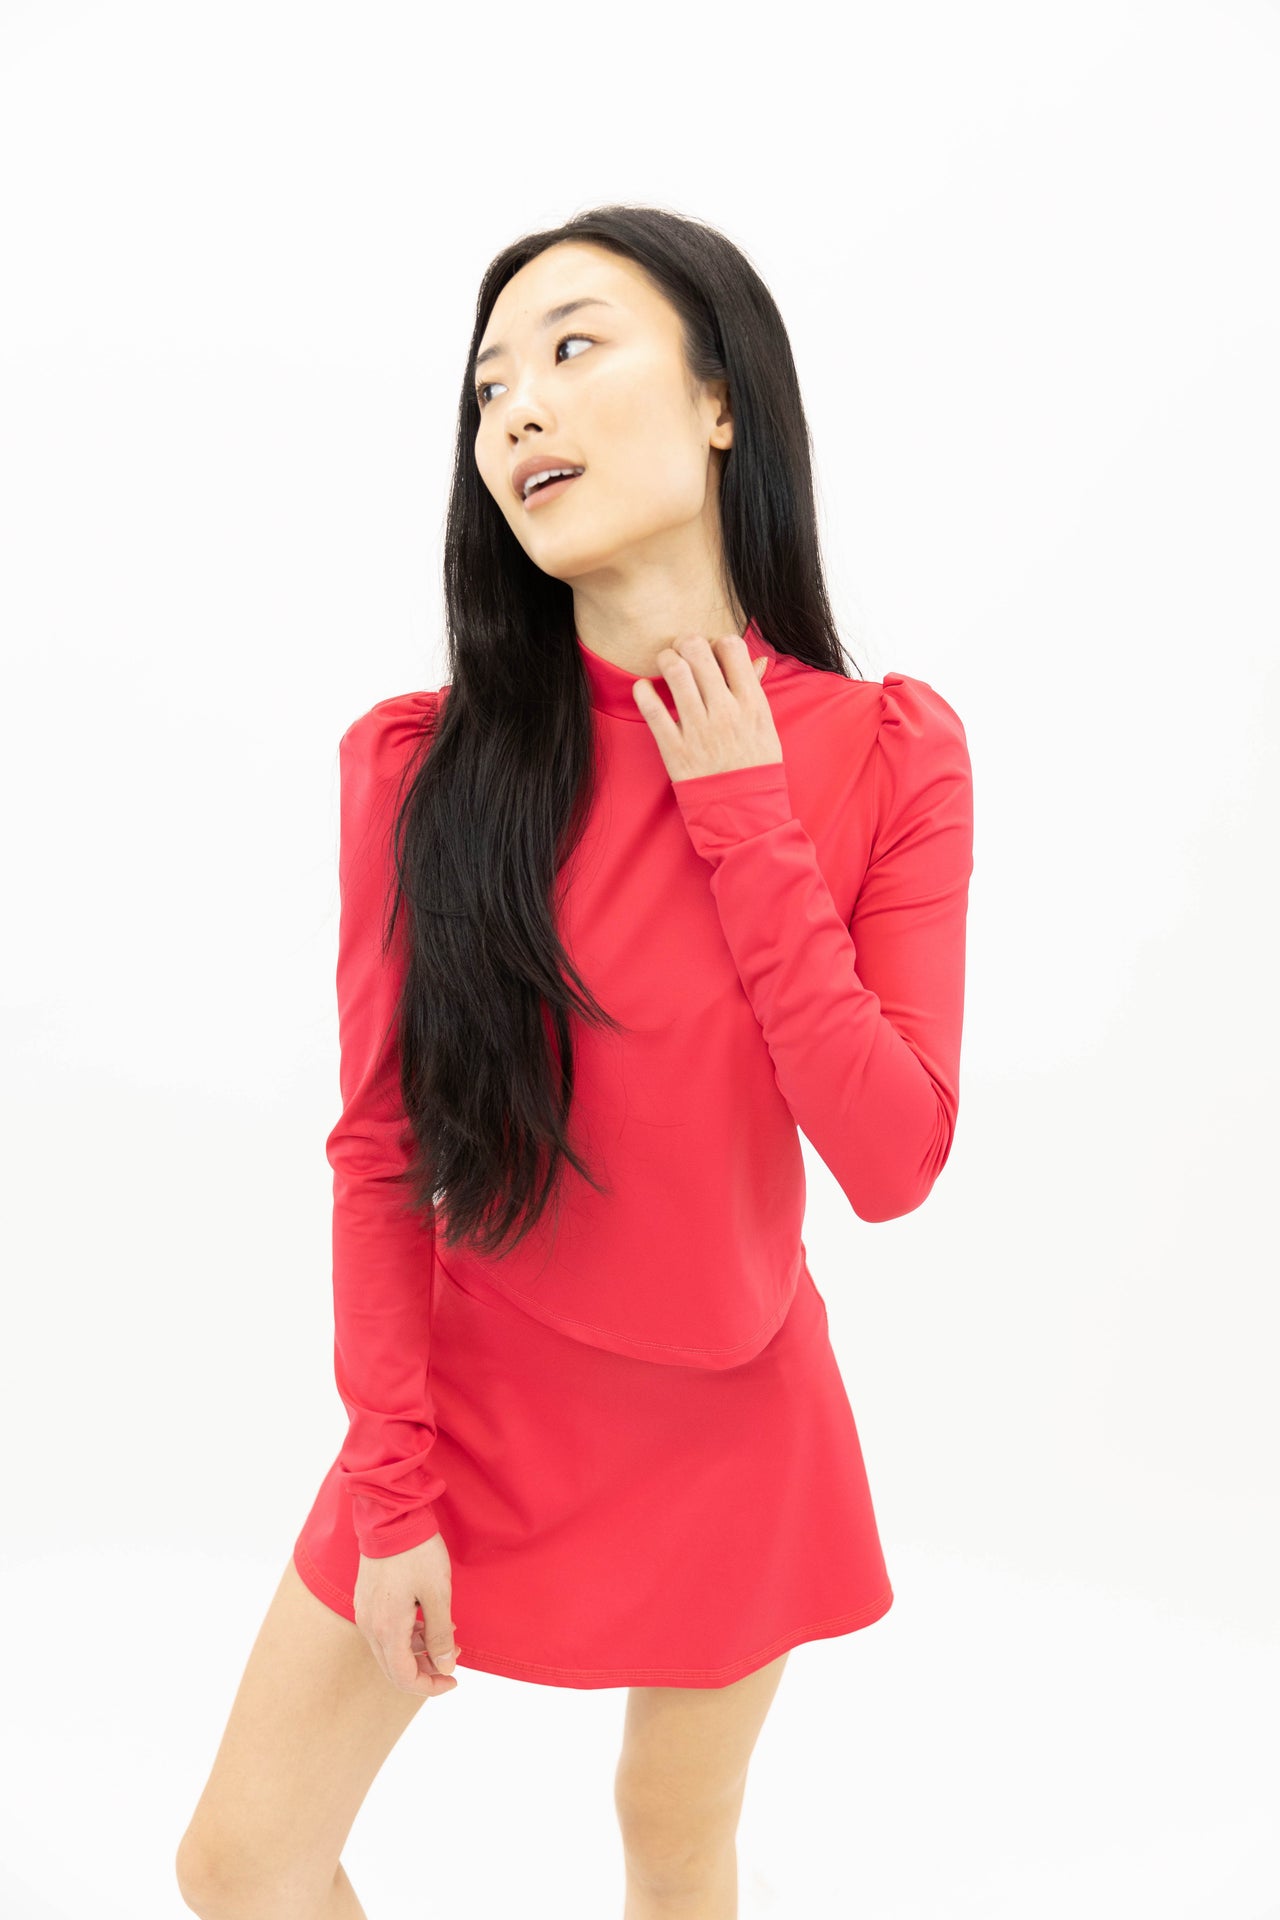 The Sun Blouse in Carnation Red